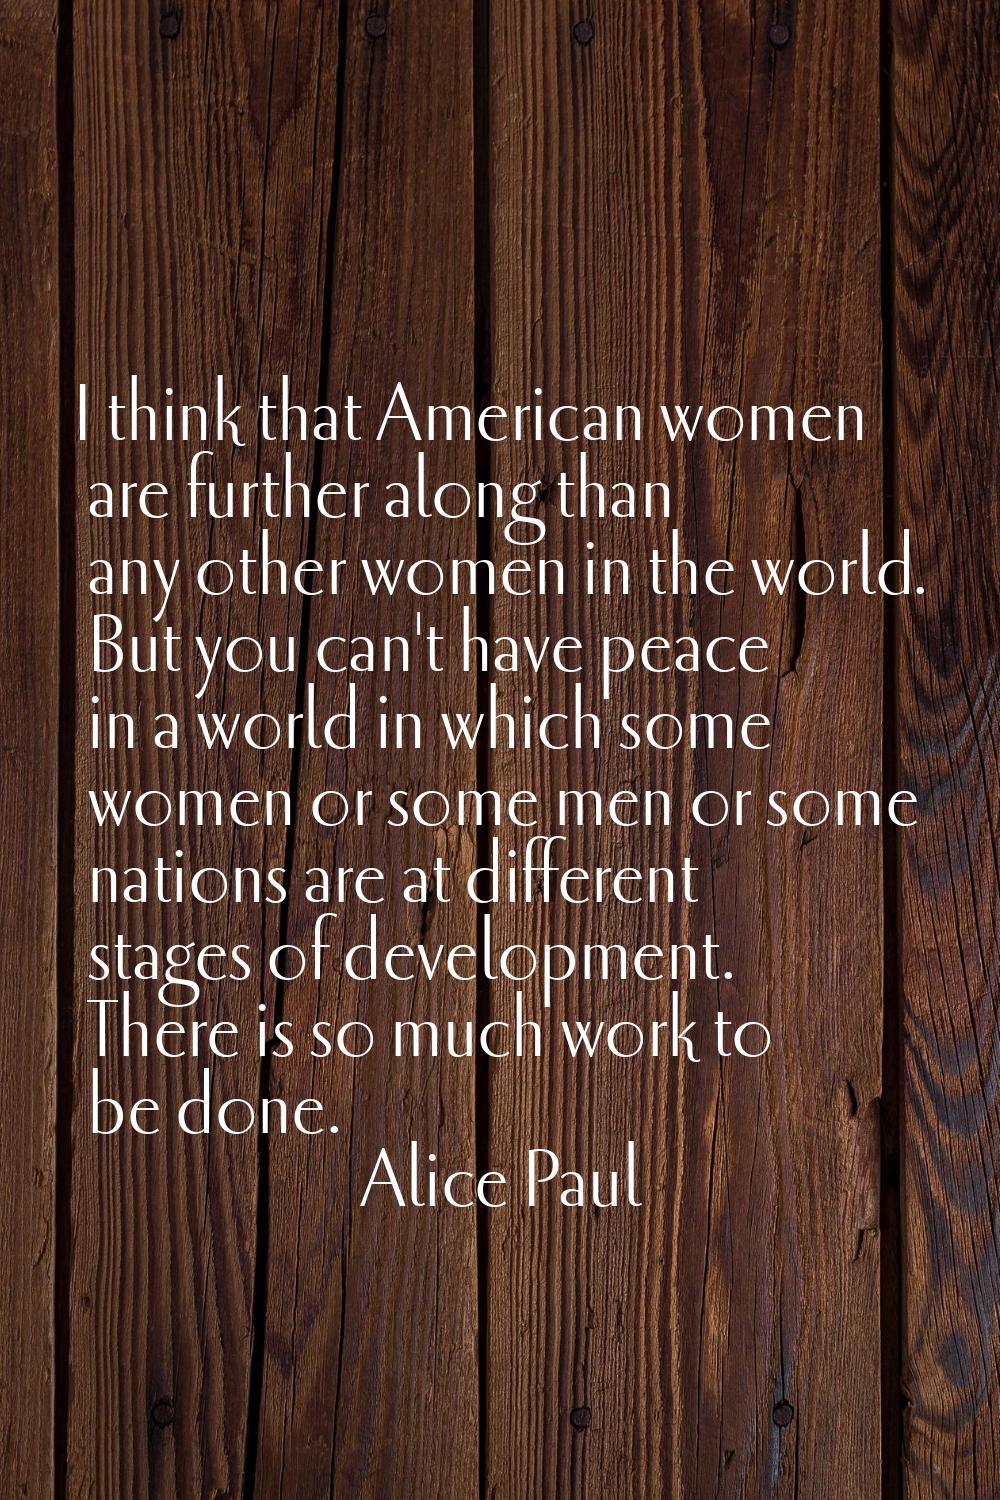 I think that American women are further along than any other women in the world. But you can't have